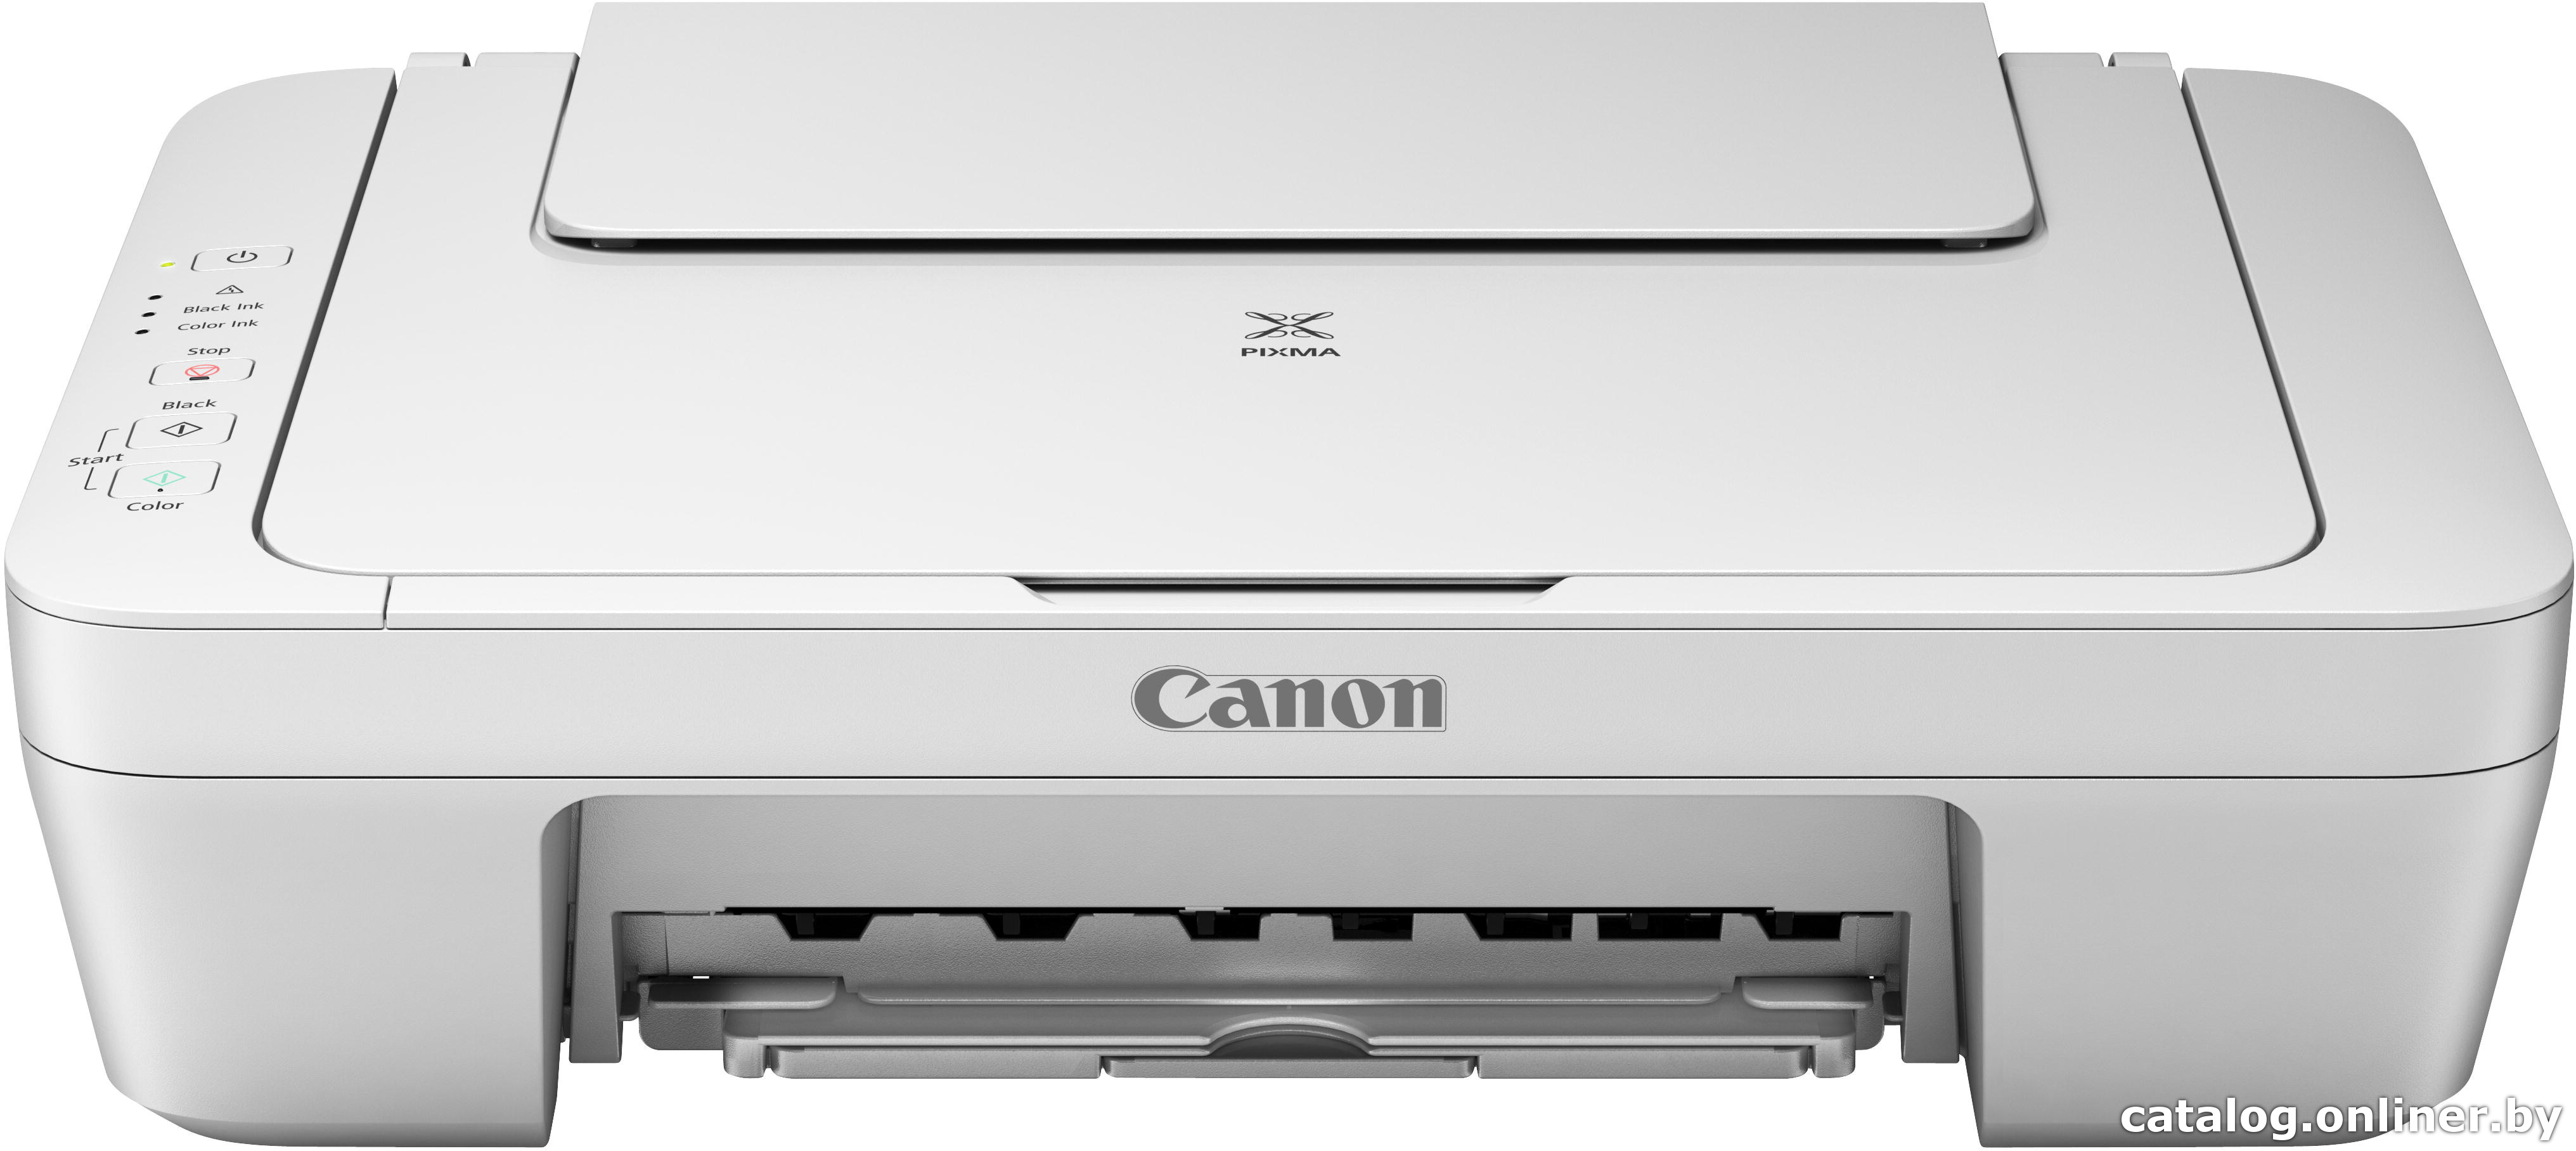 Canon MG2450 Scanner Driver Mac High Sierra 10.13 How to Download and Install - Featured